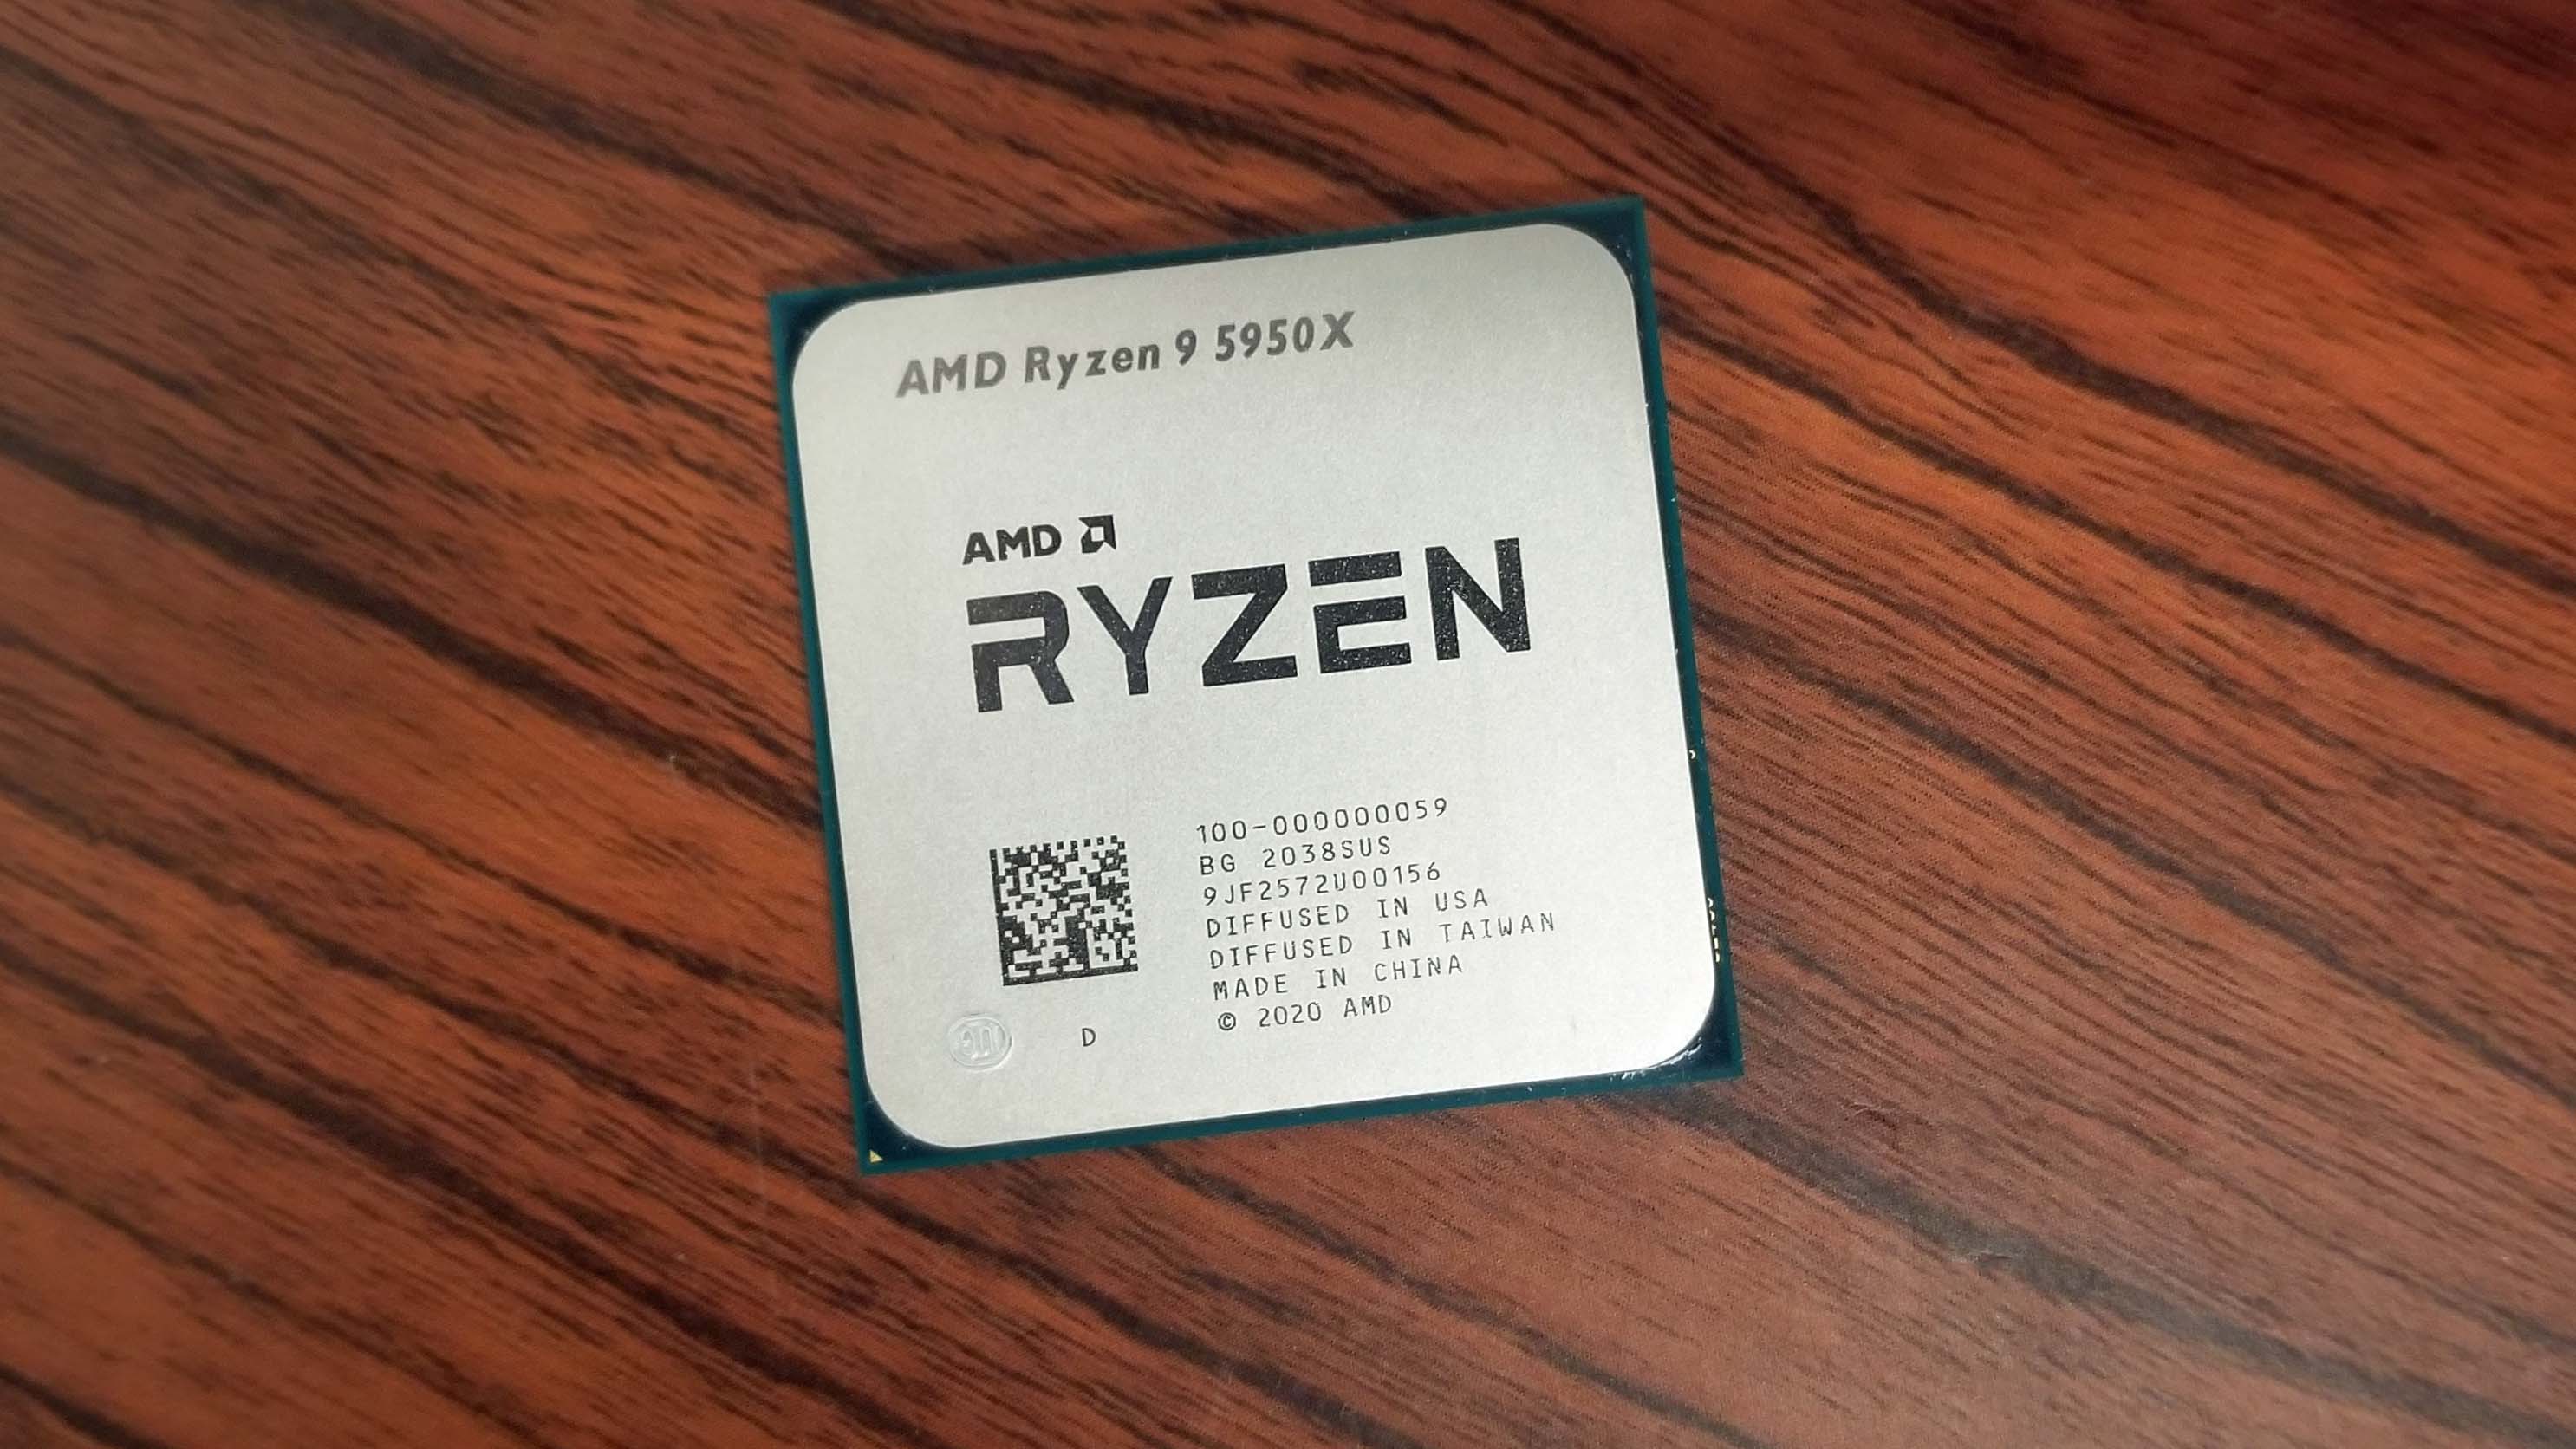 Taking the Silicon Throne - AMD Ryzen 9 5950X and 5900X Review 